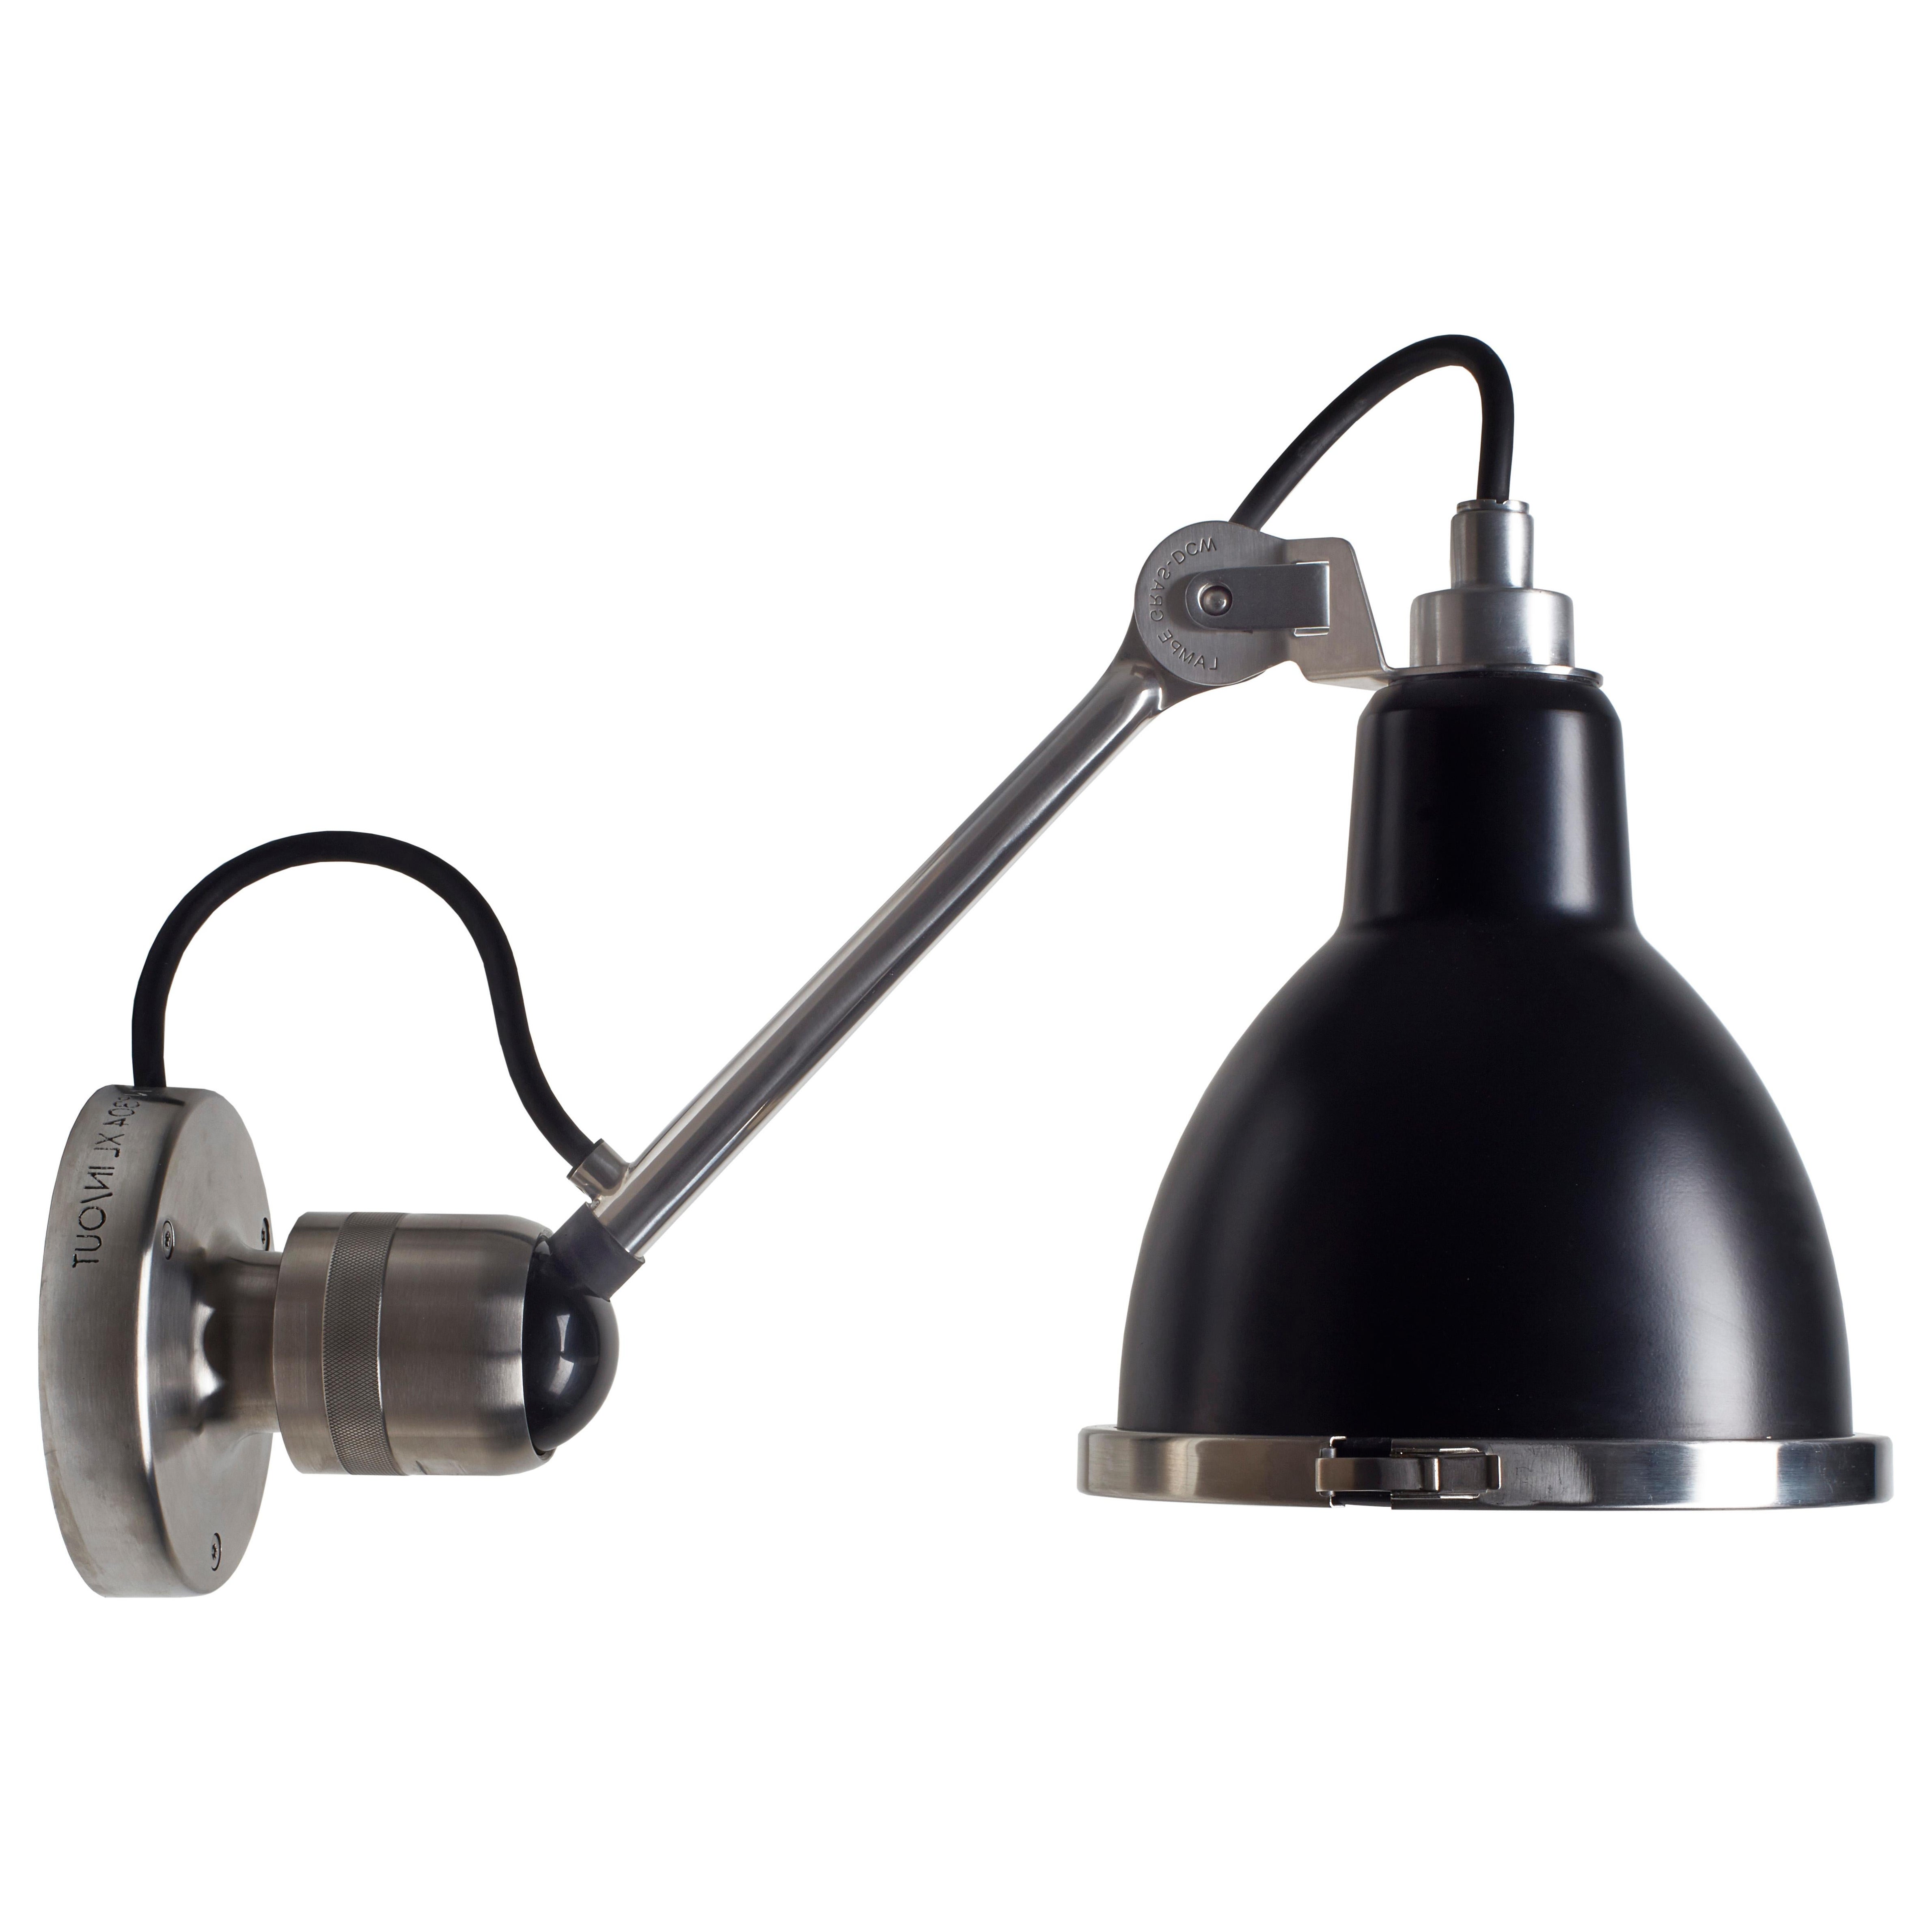 DCW Editions La Lampe Gras N°304 XL Round Wall Lamp in Bare Arm & Black Shade 2